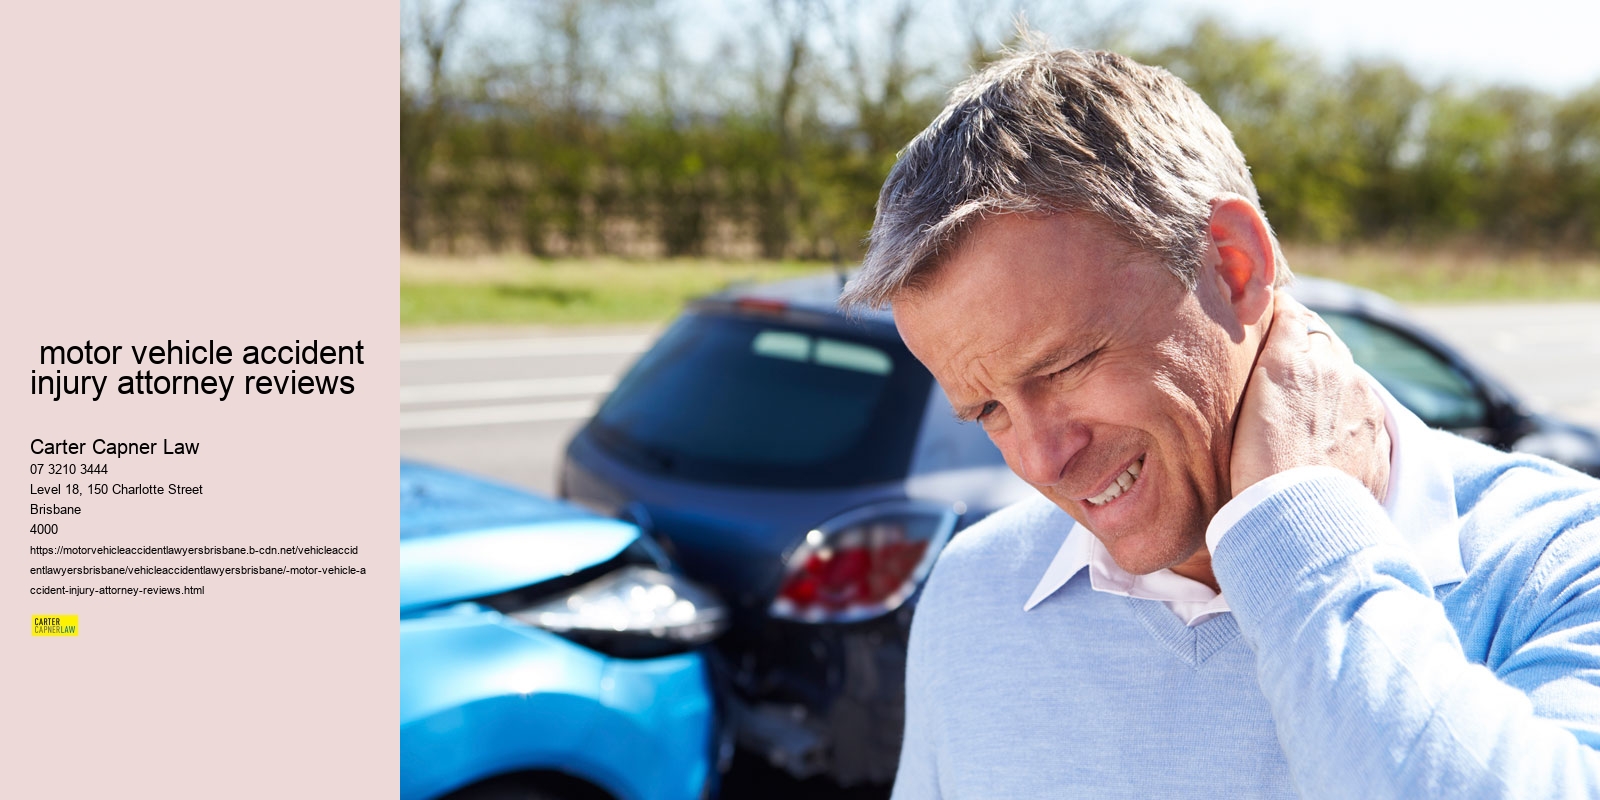  motor vehicle accident injury attorney reviews 